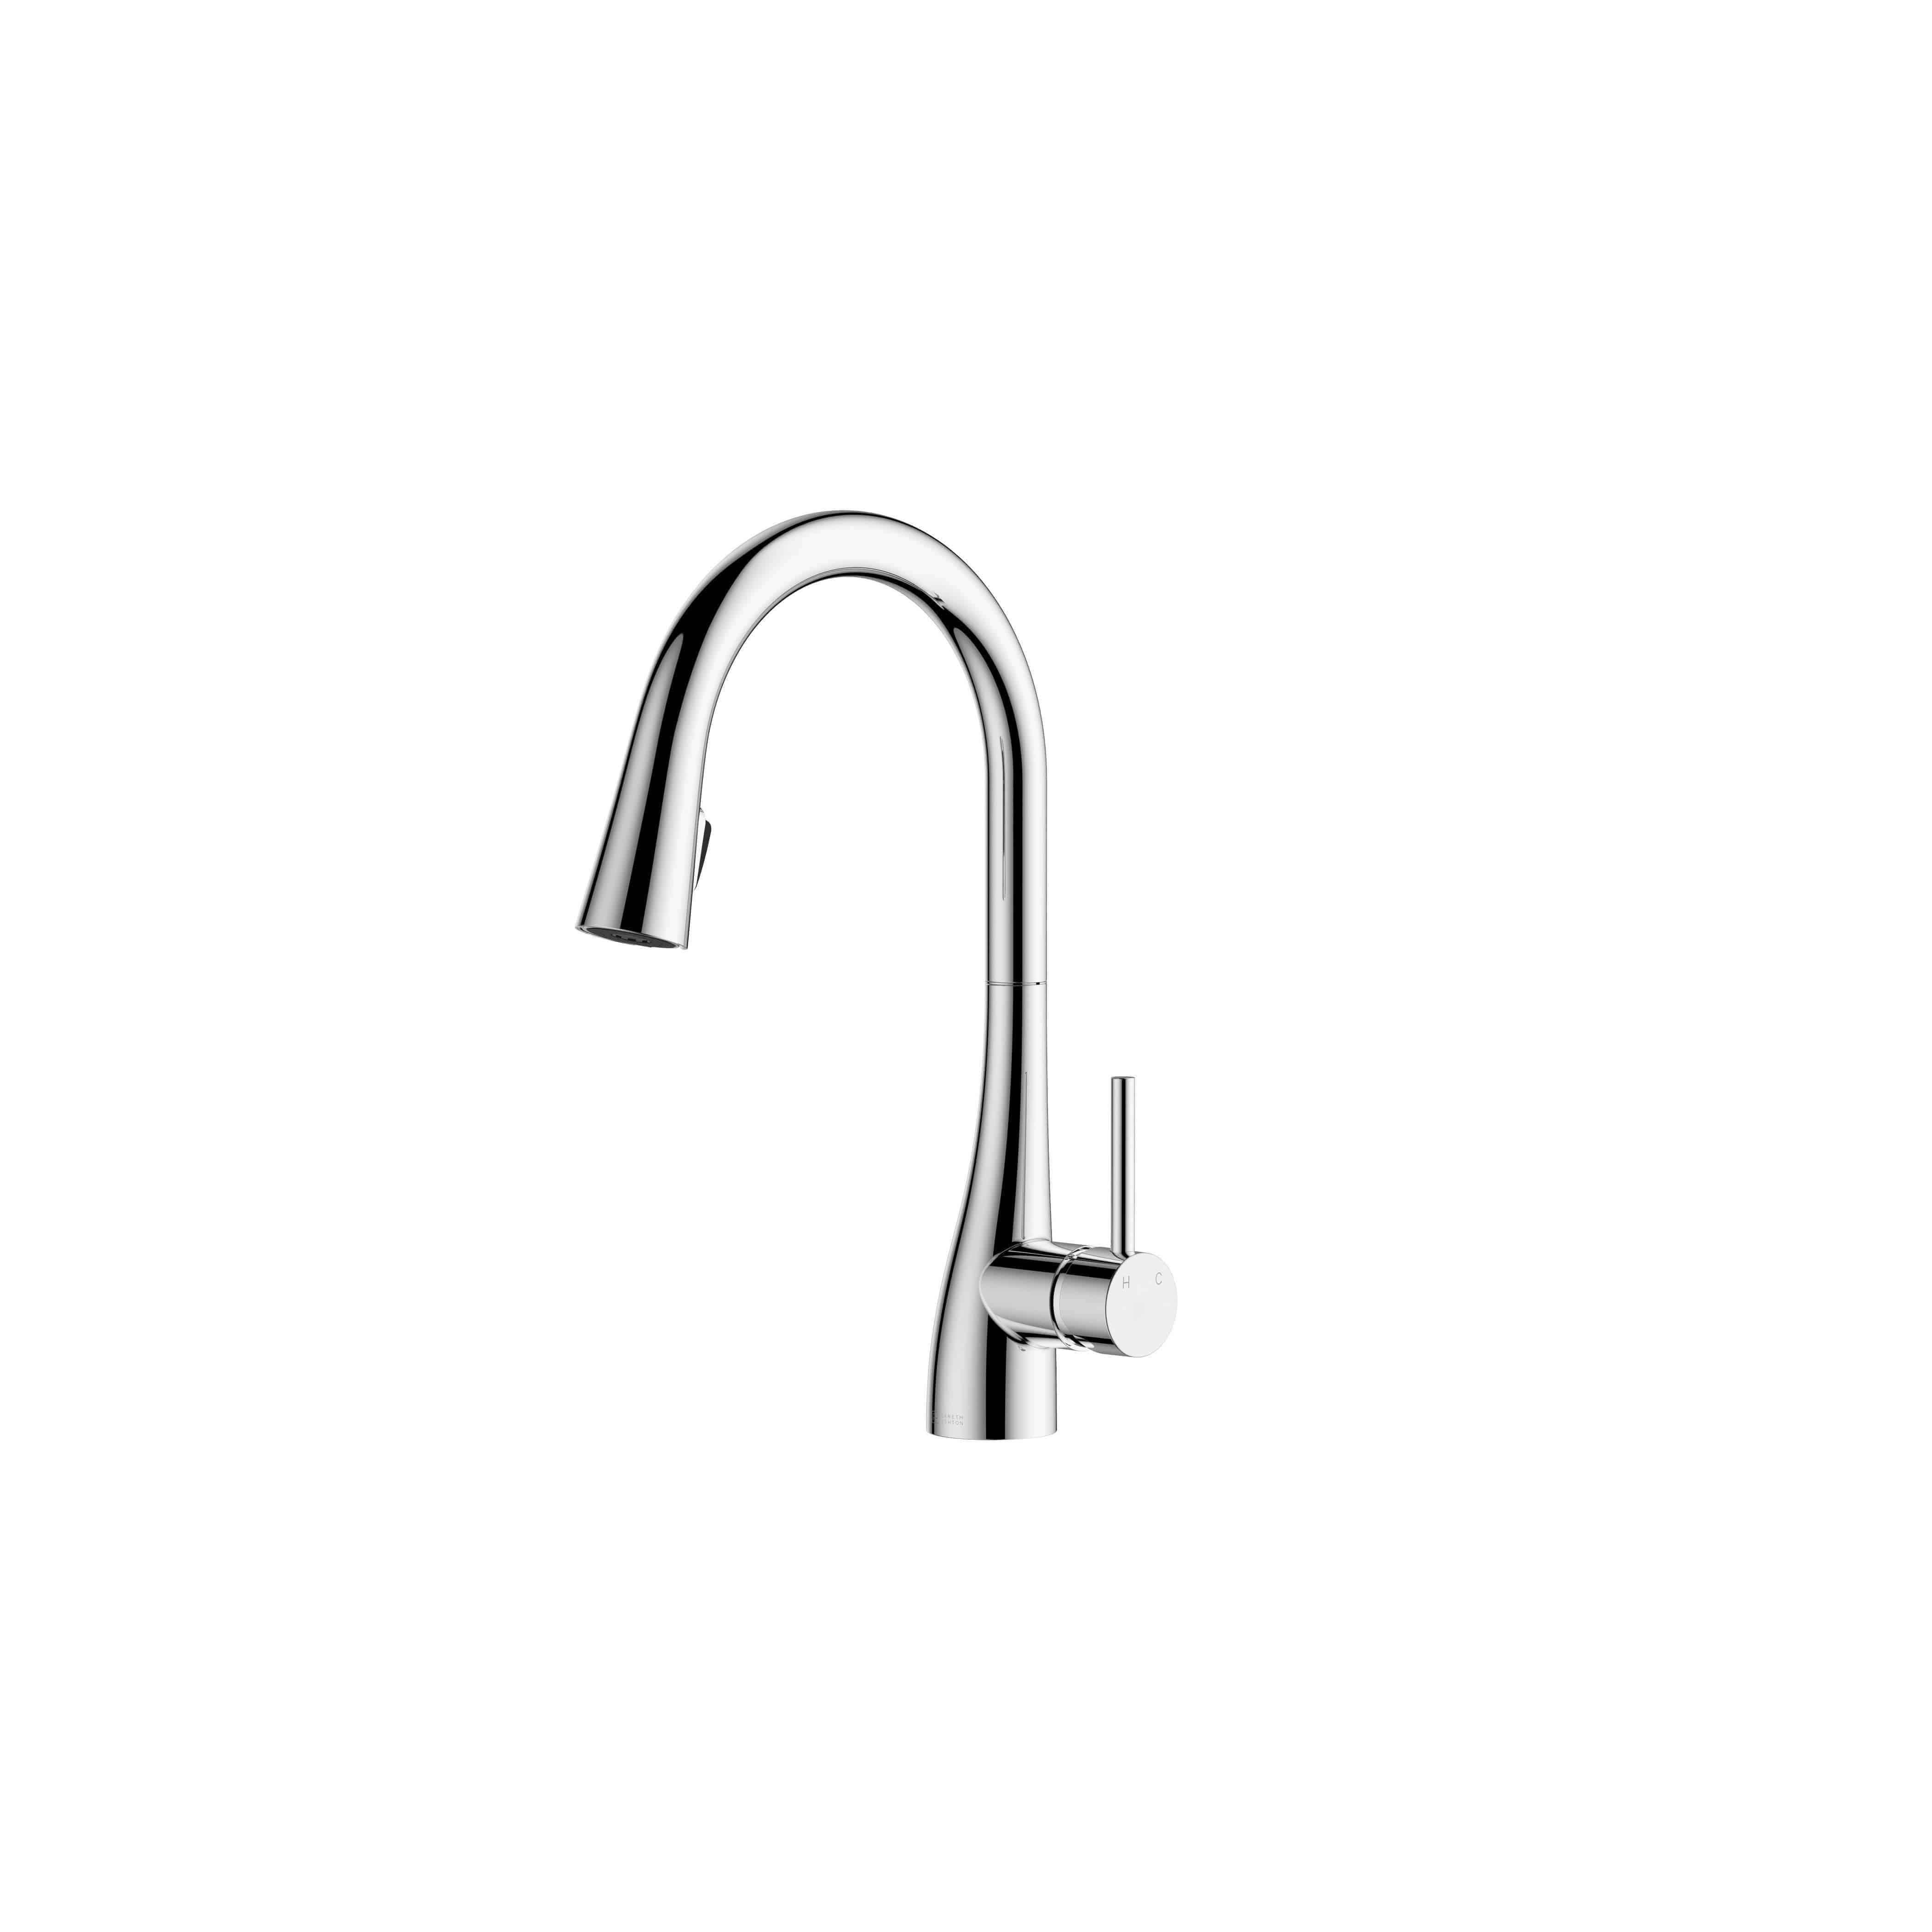 Abey Gareth Ashton Conic Concealed Pull Out Spray Mixer Chrome 5K - Burdens Plumbing